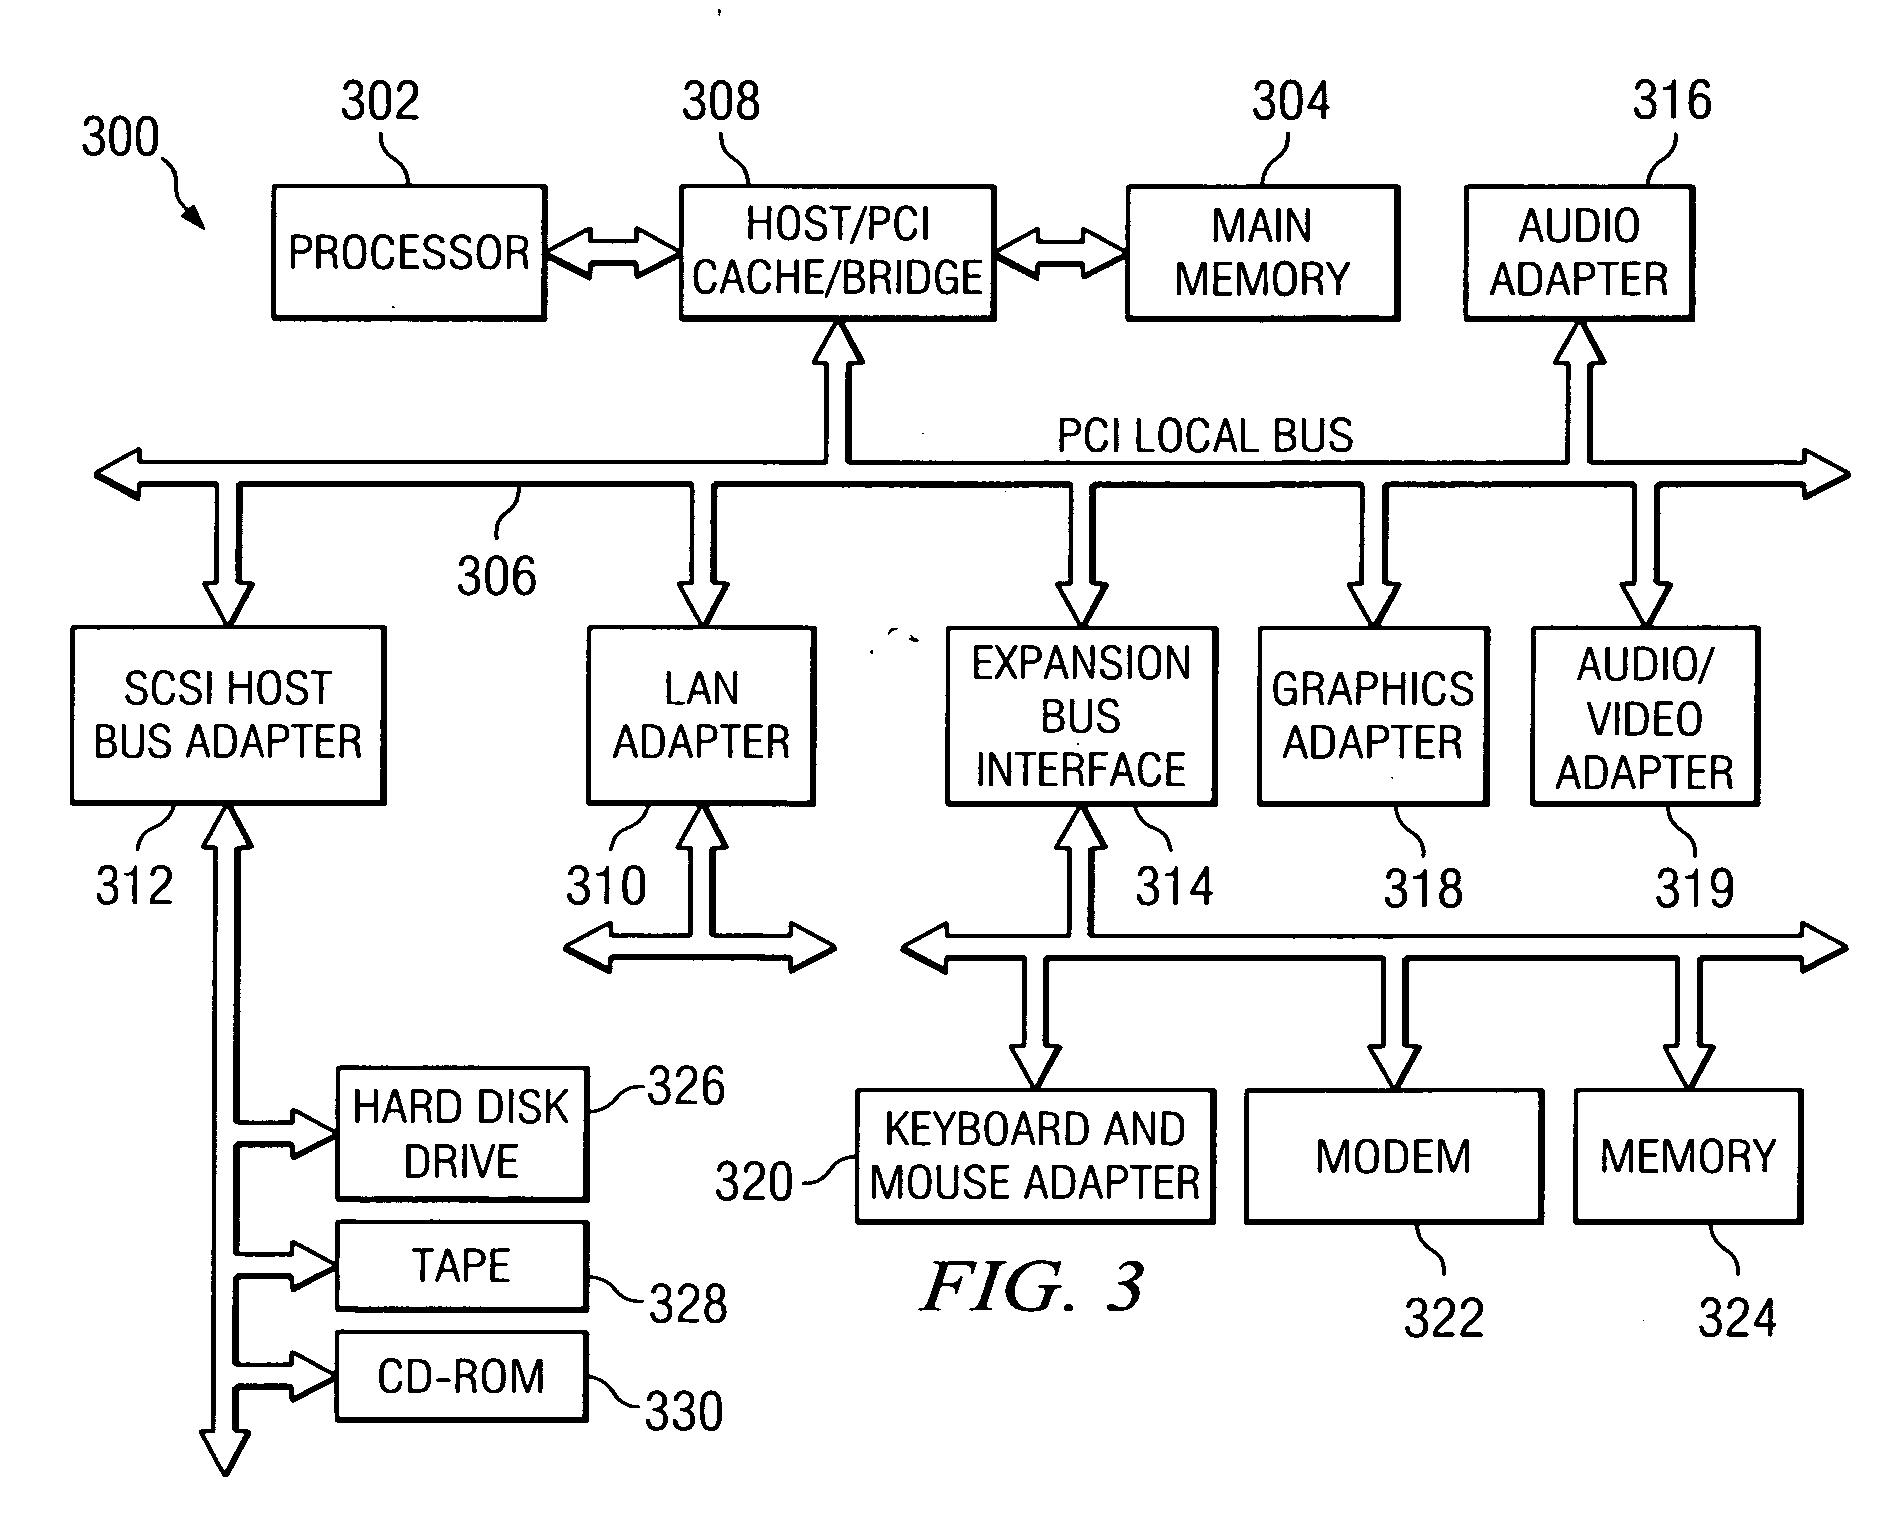 Method and process to automatically perform test builds or translated files for a software product